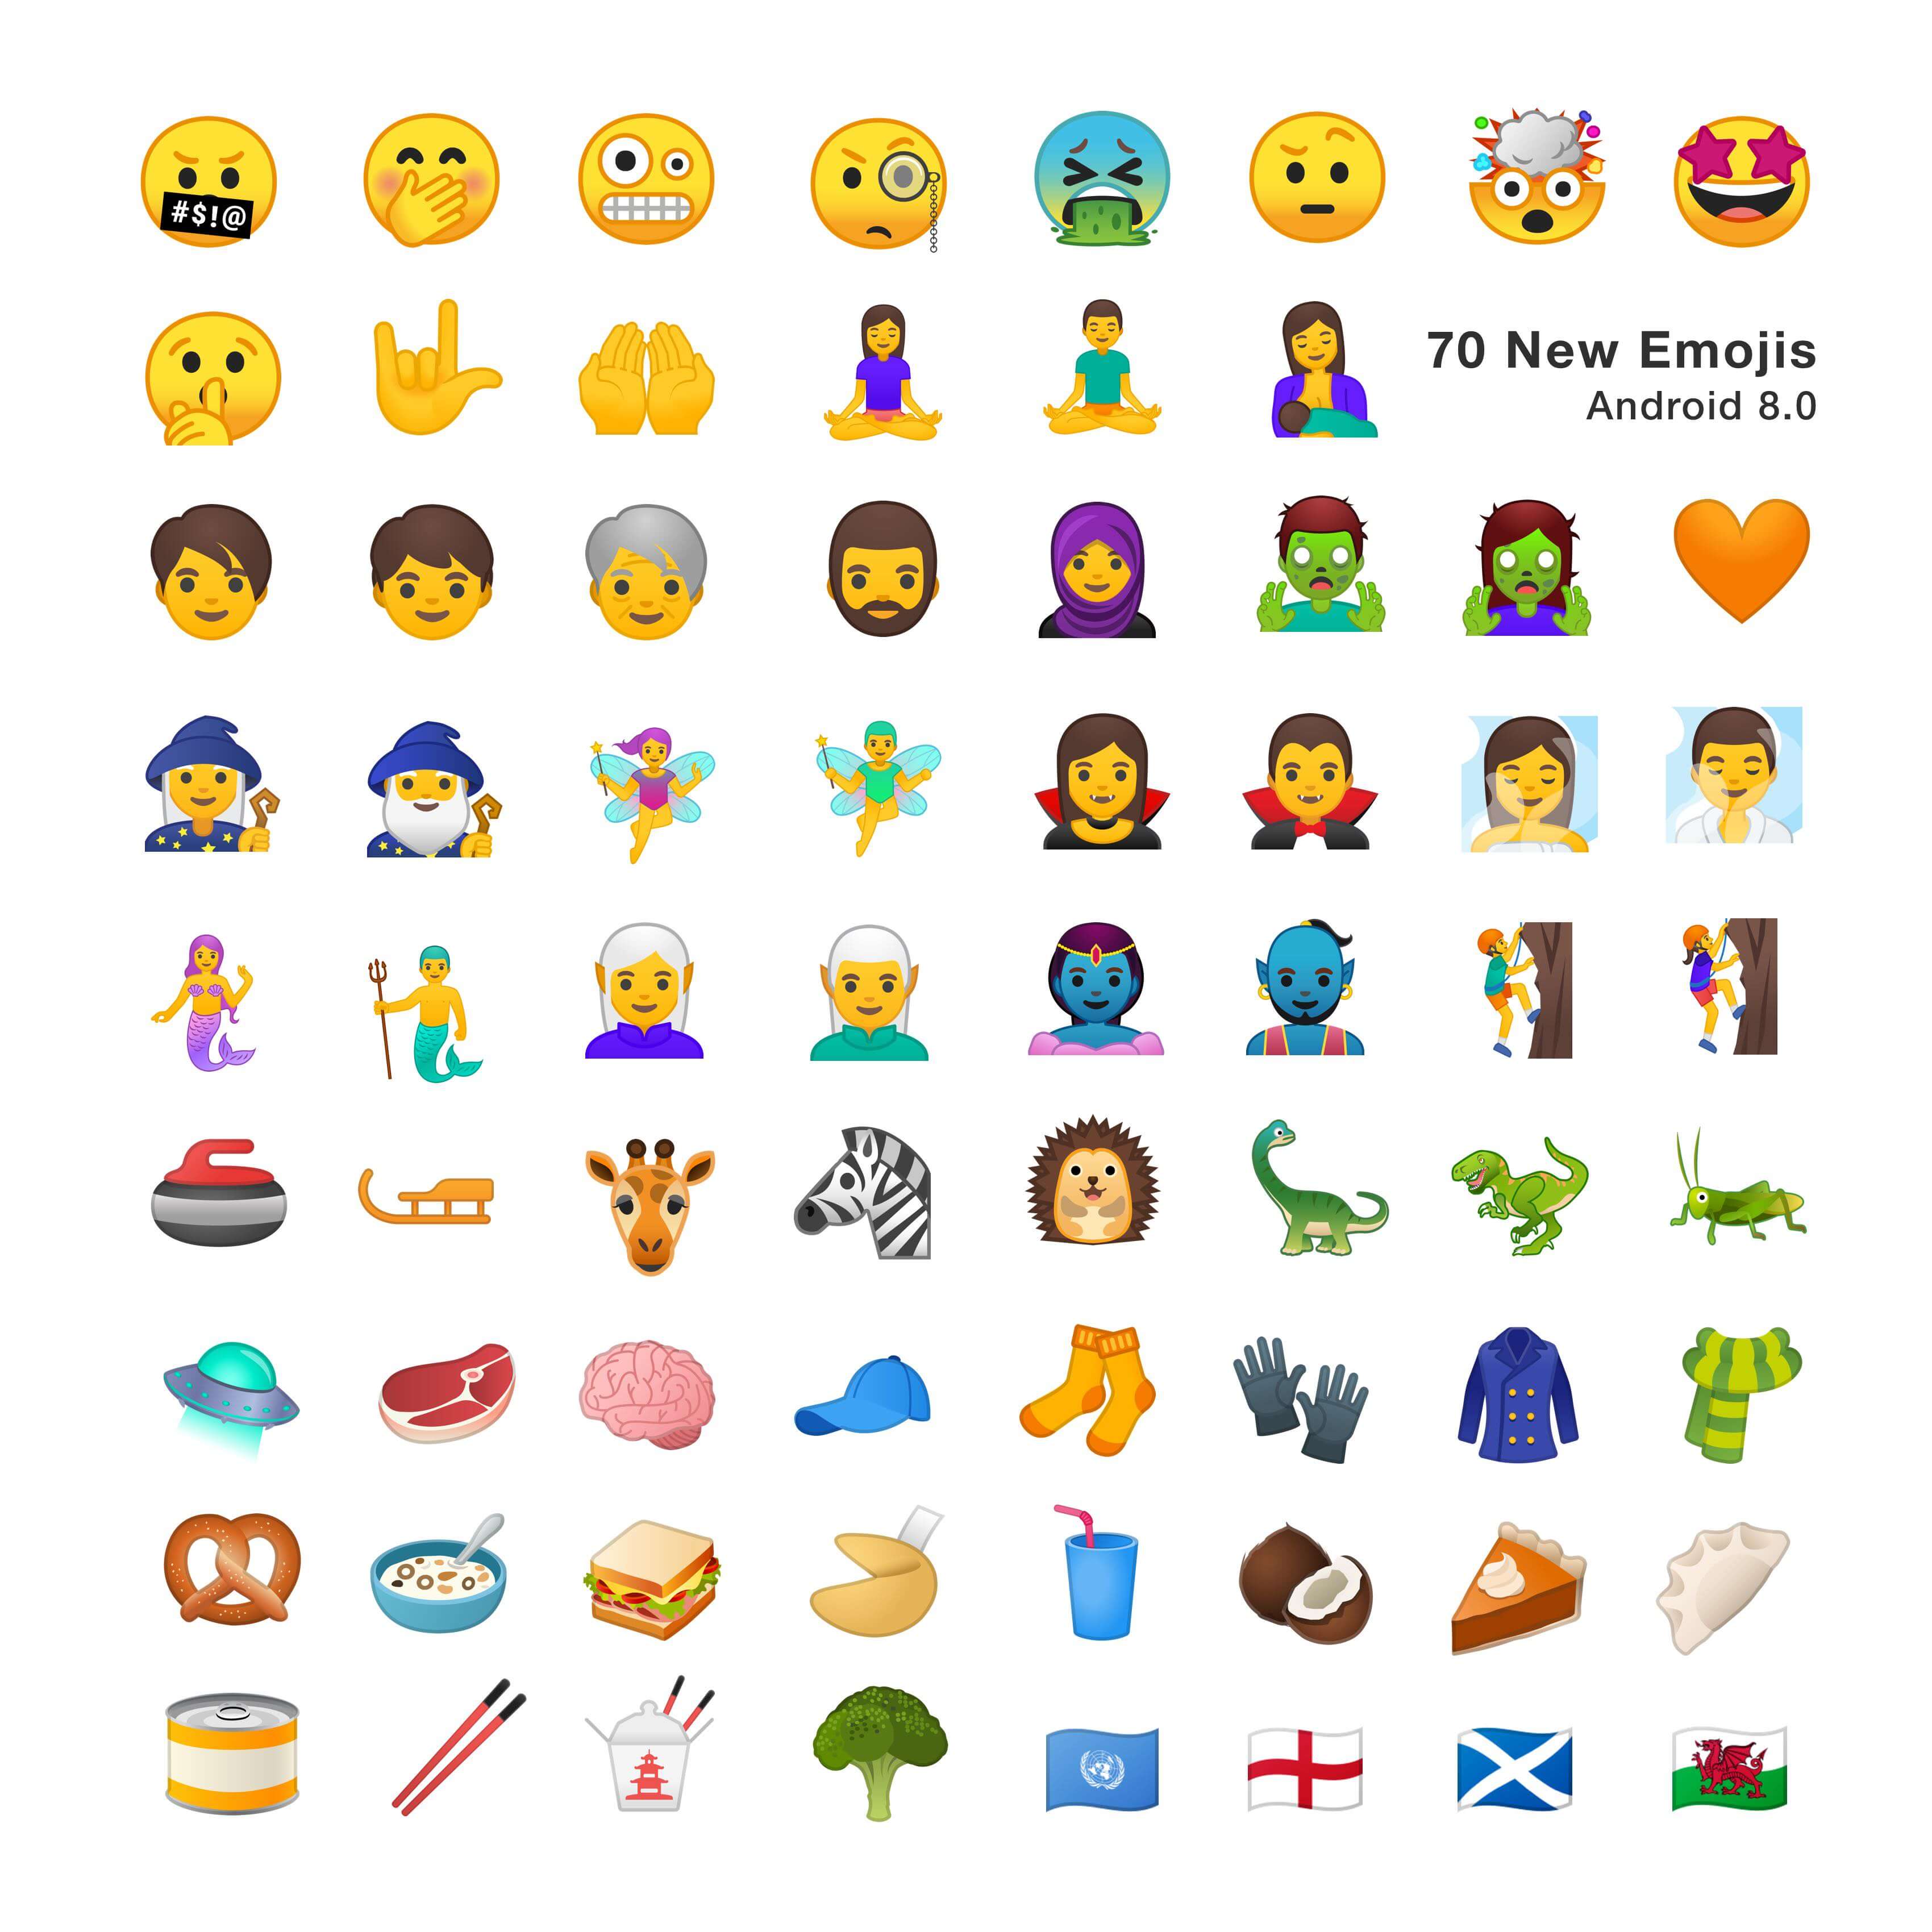 new emojis for android 8.0